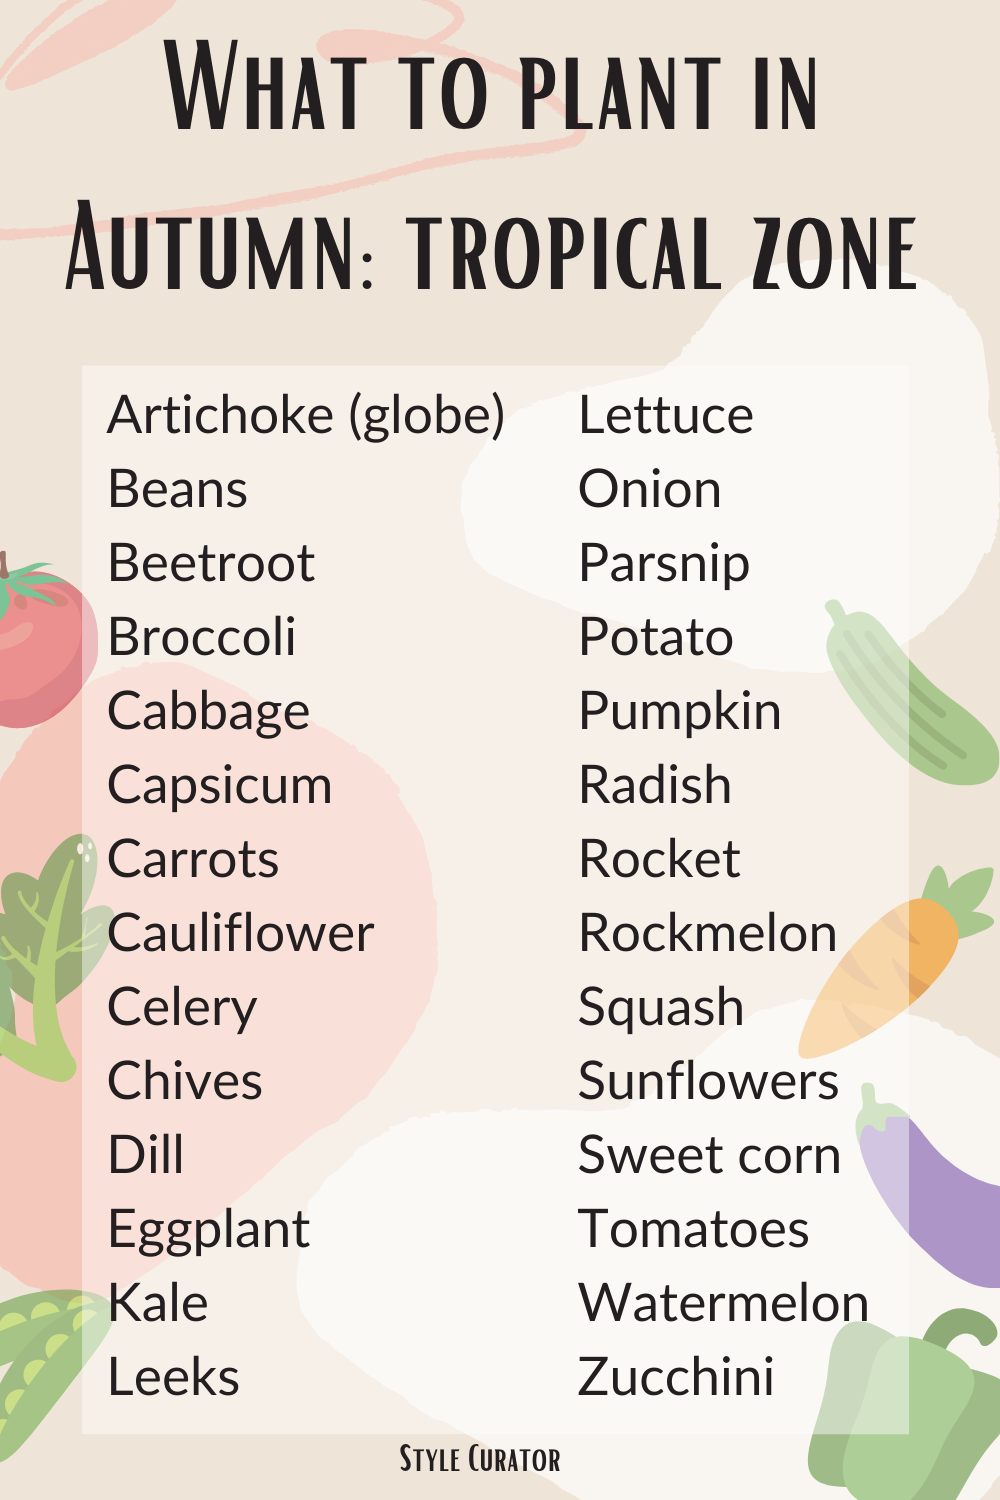 What to plant in Autumn in Australia - tropical zone